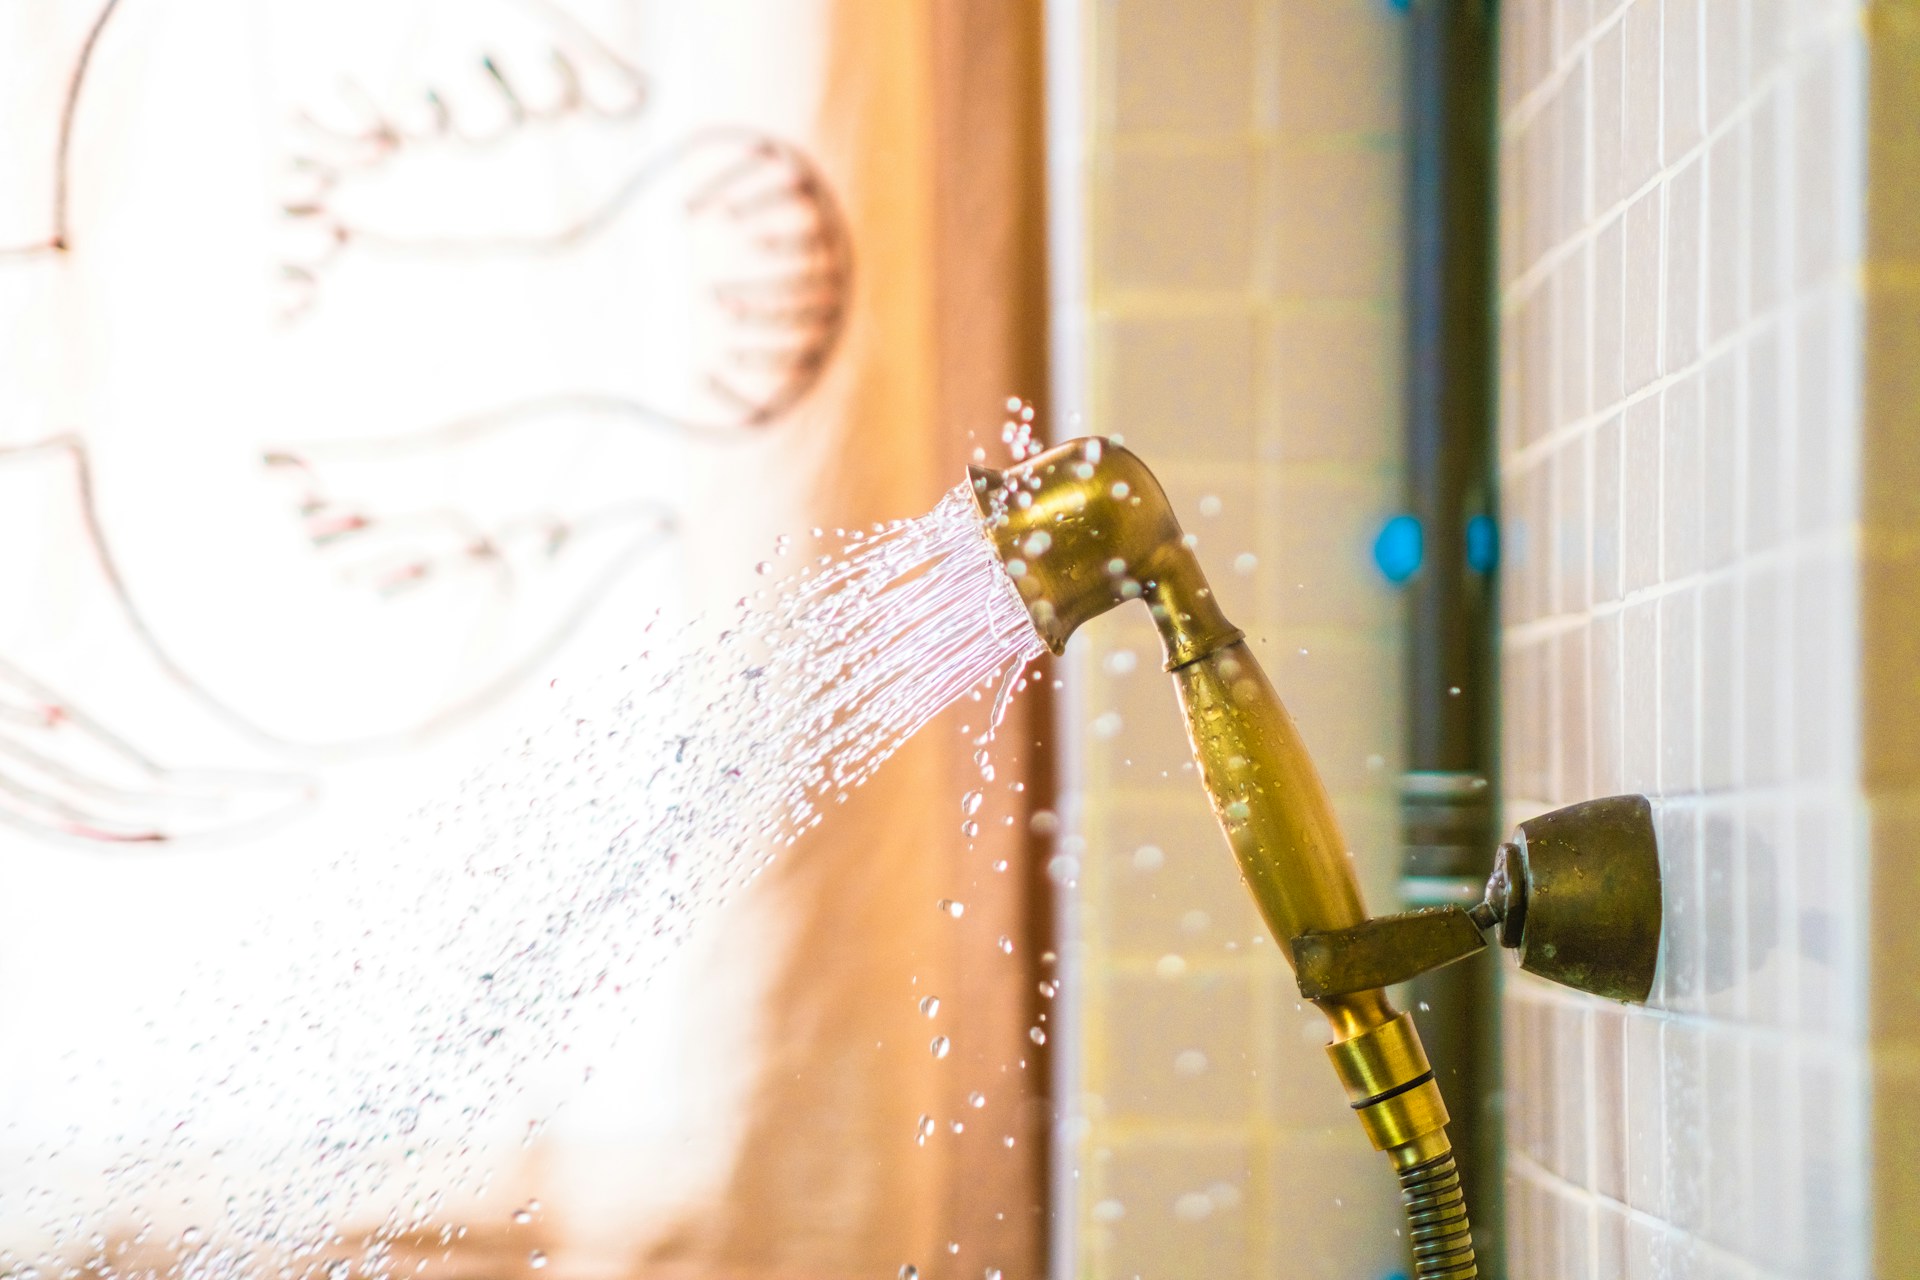 Golden shower head spraying water. Photo by Igal Ness on Unsplash